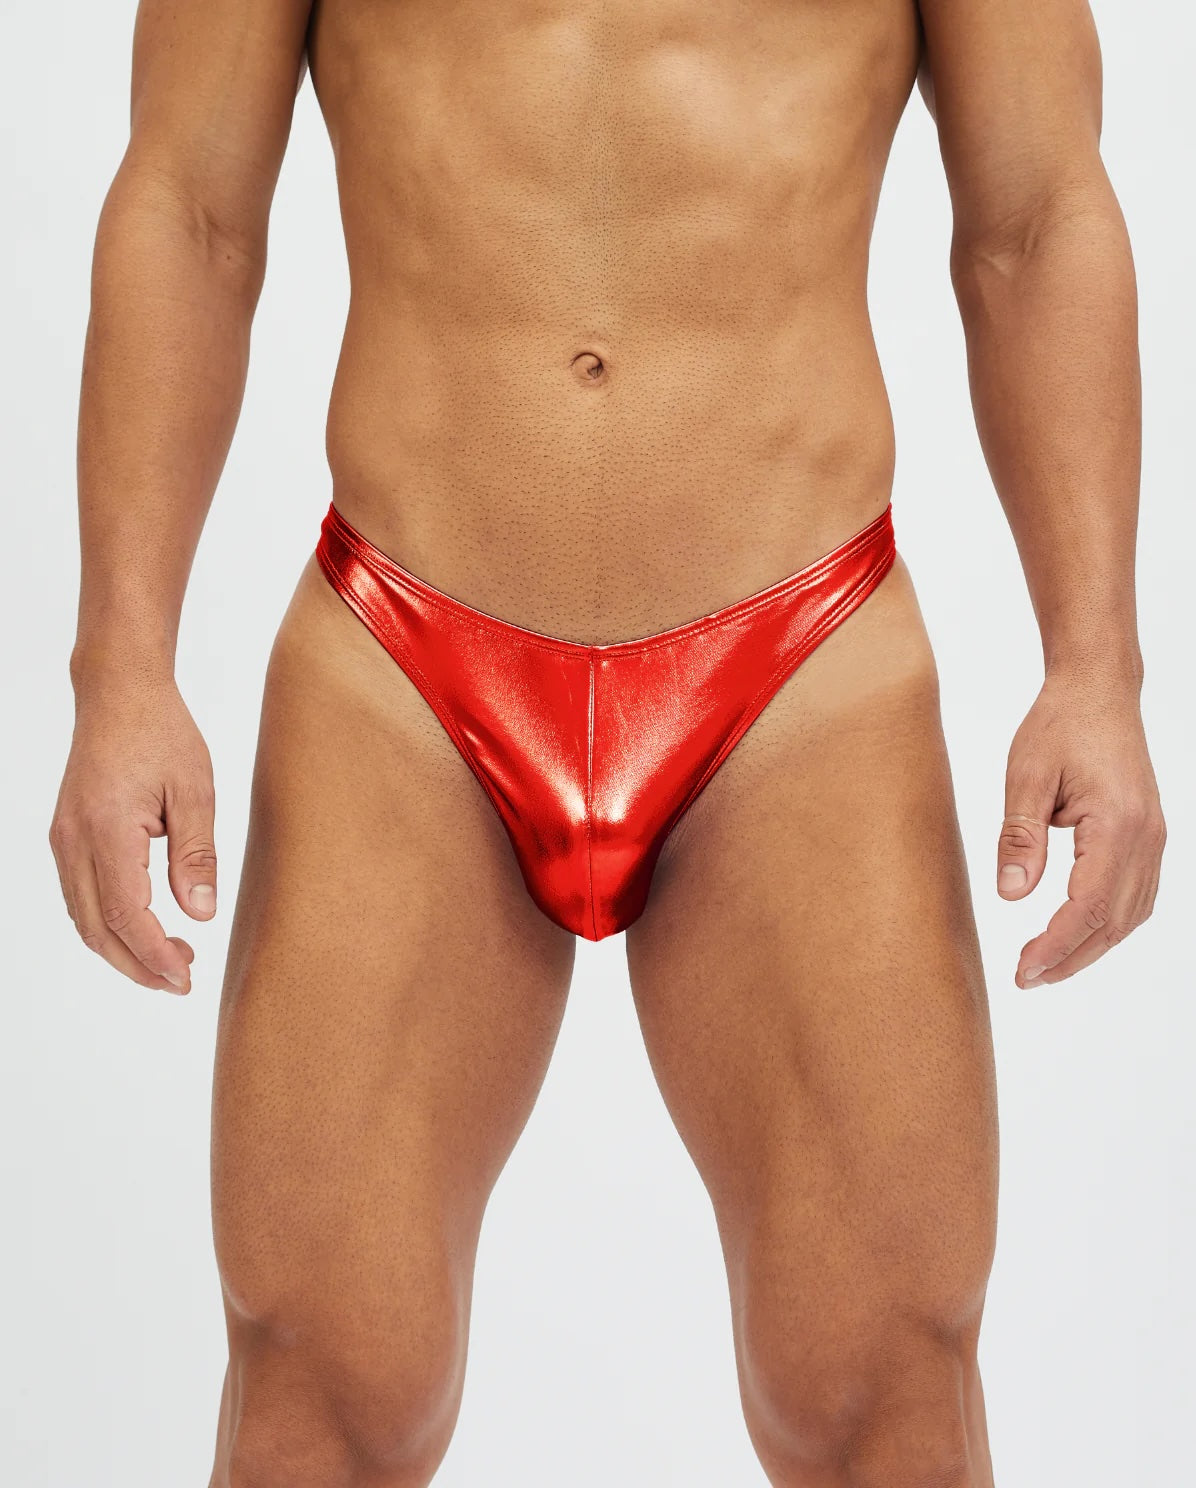 Project Claude Diamond Back Thong Red